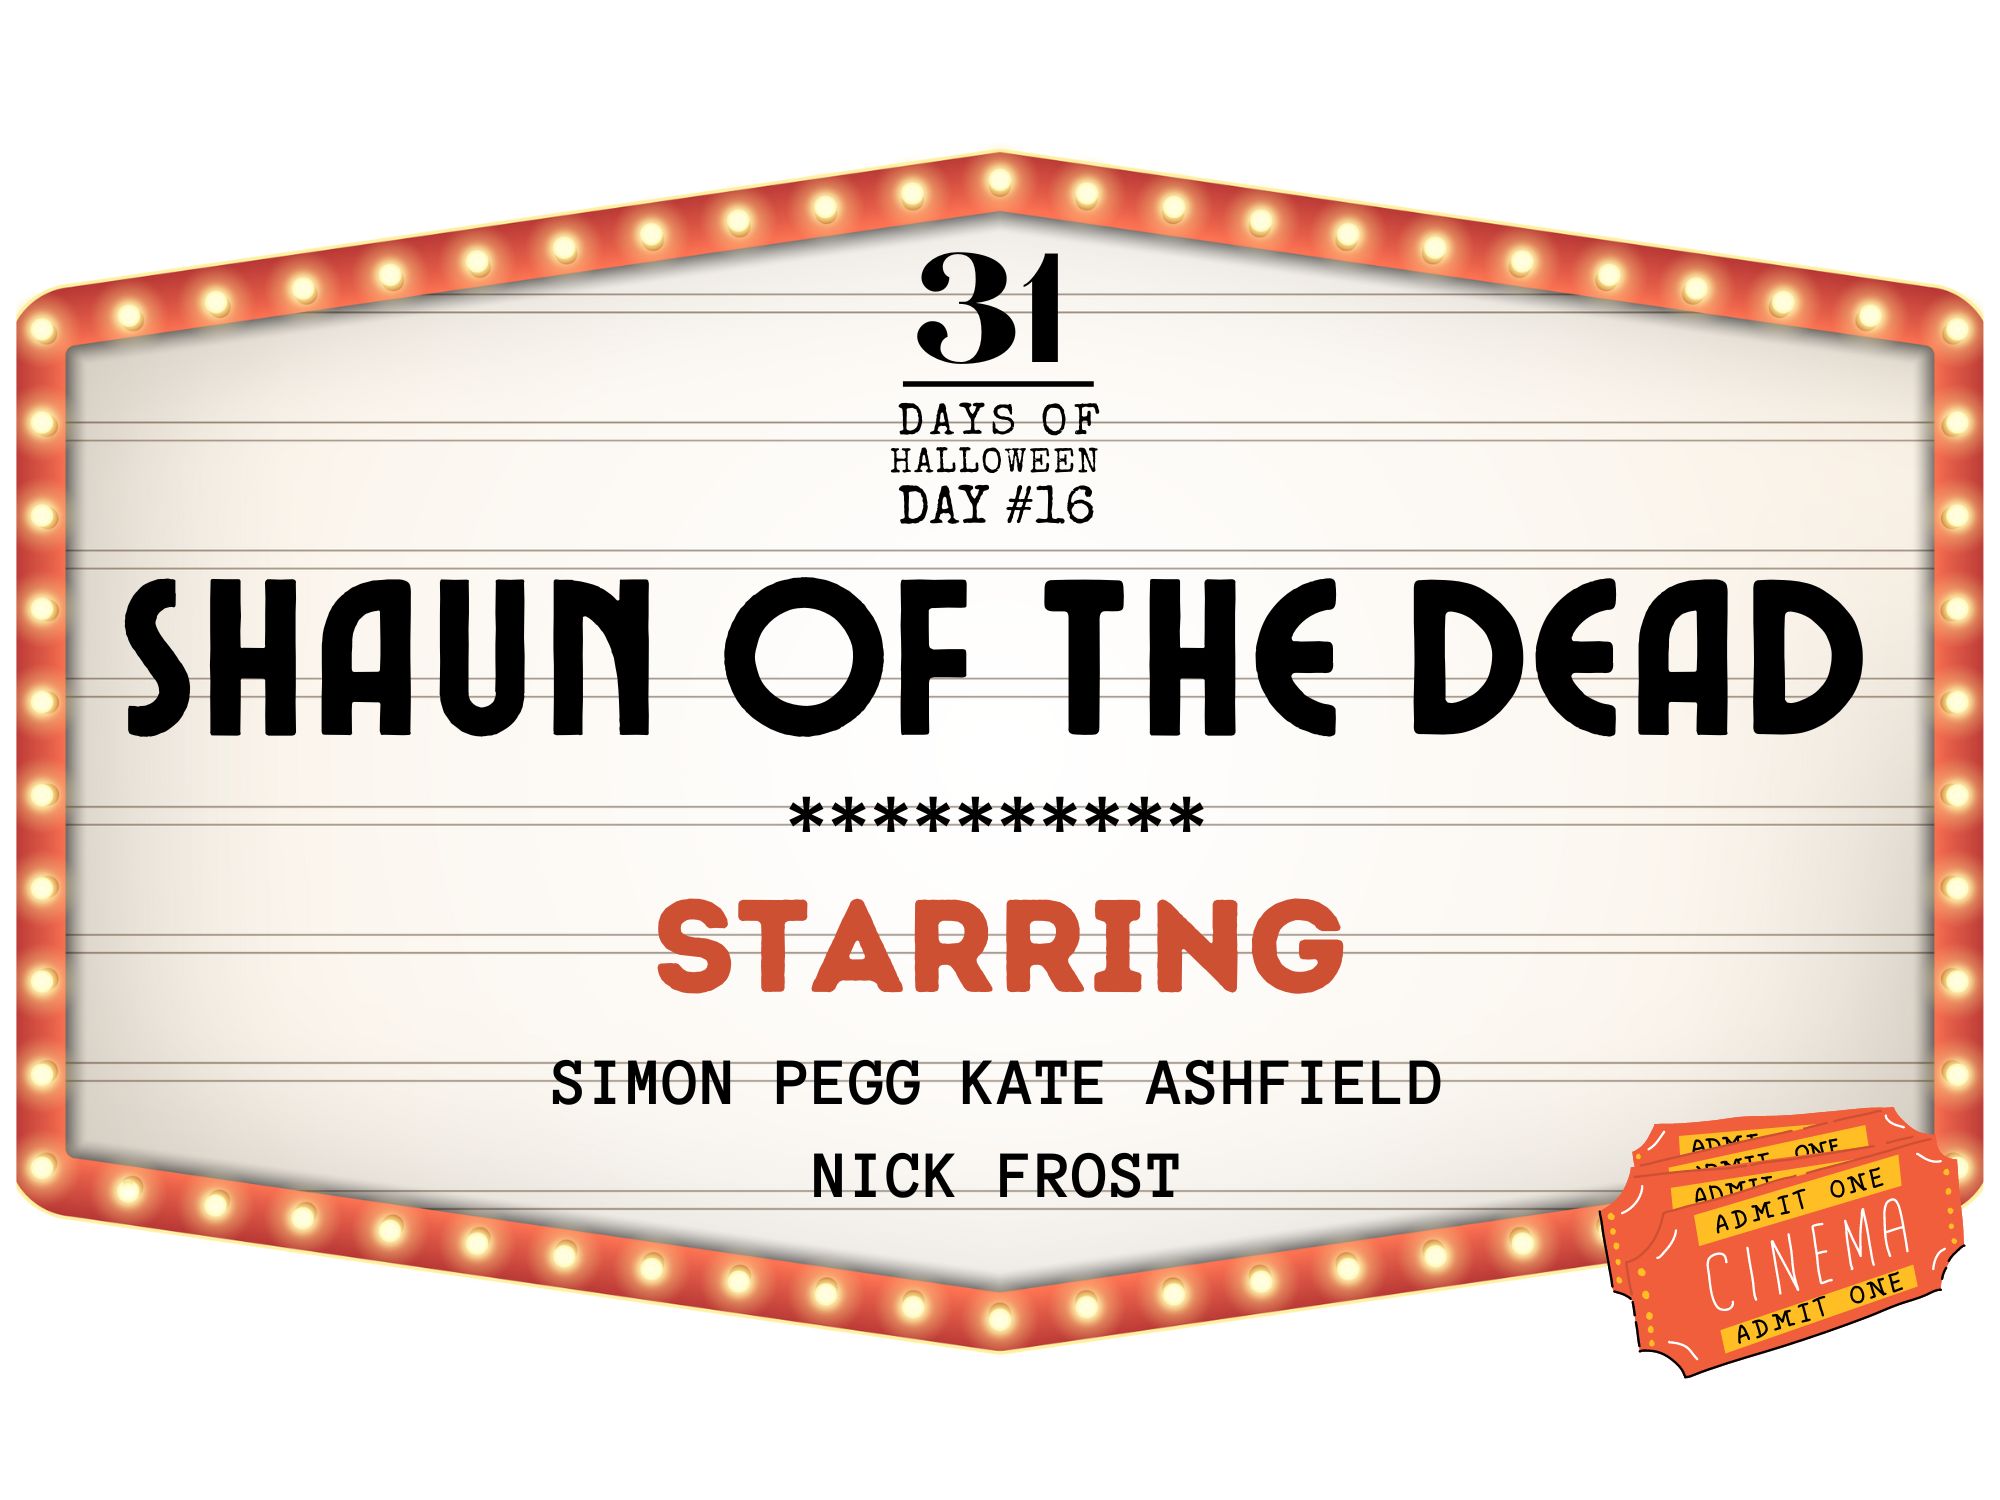 31 Days of Halloween: Day #16, Shaun of the Dead